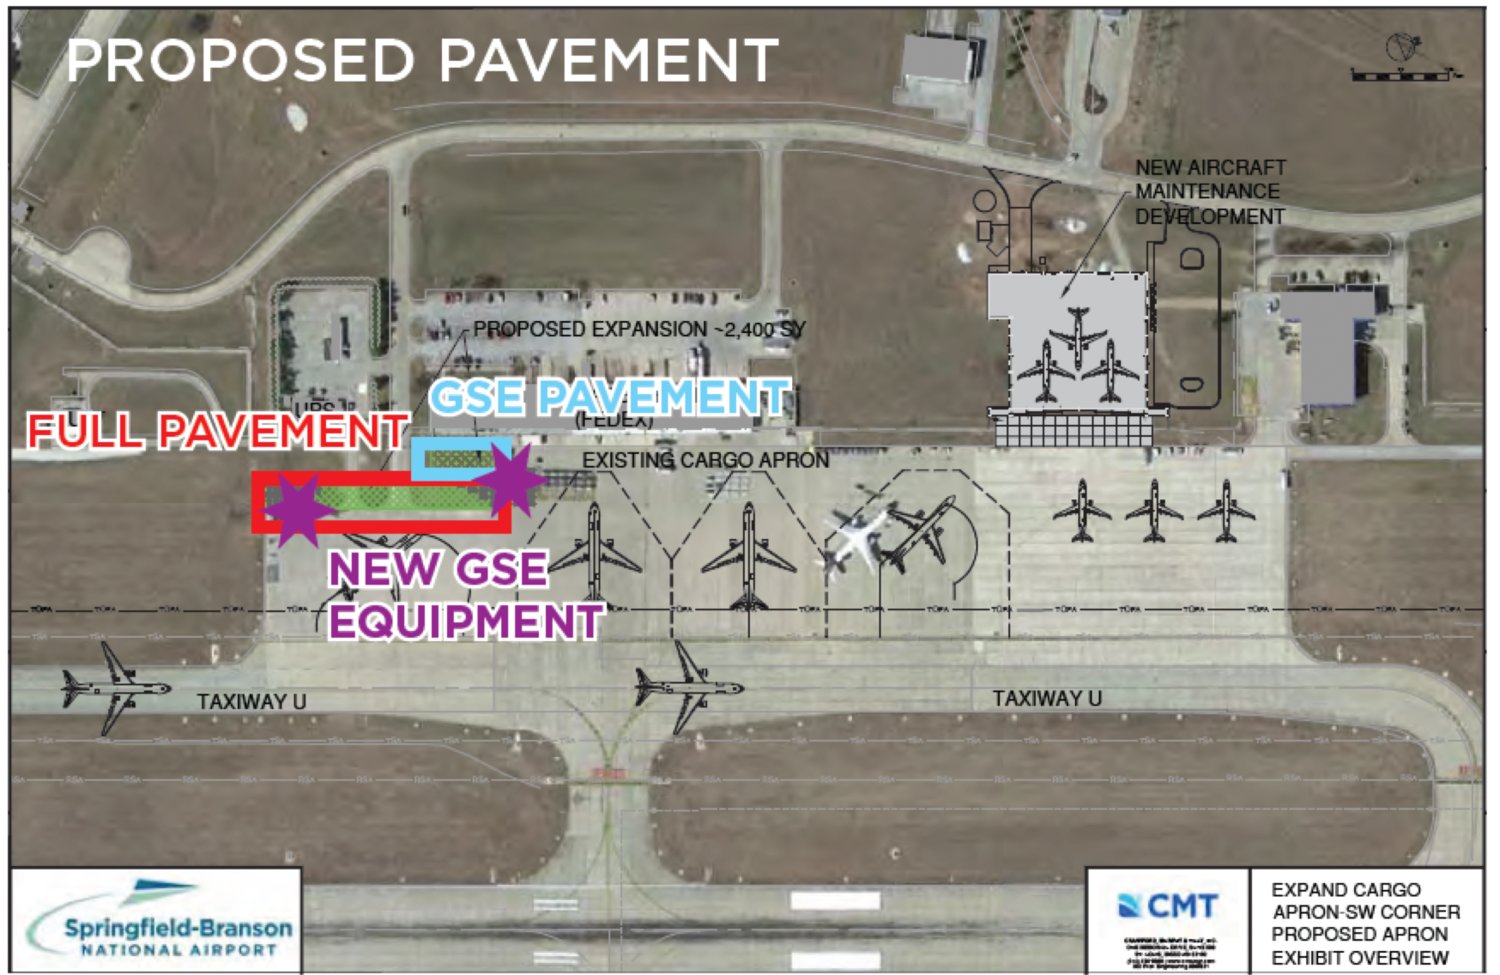 An aerial view shows the proposed expansion for the existing cargo apron and ground service equipment area. 